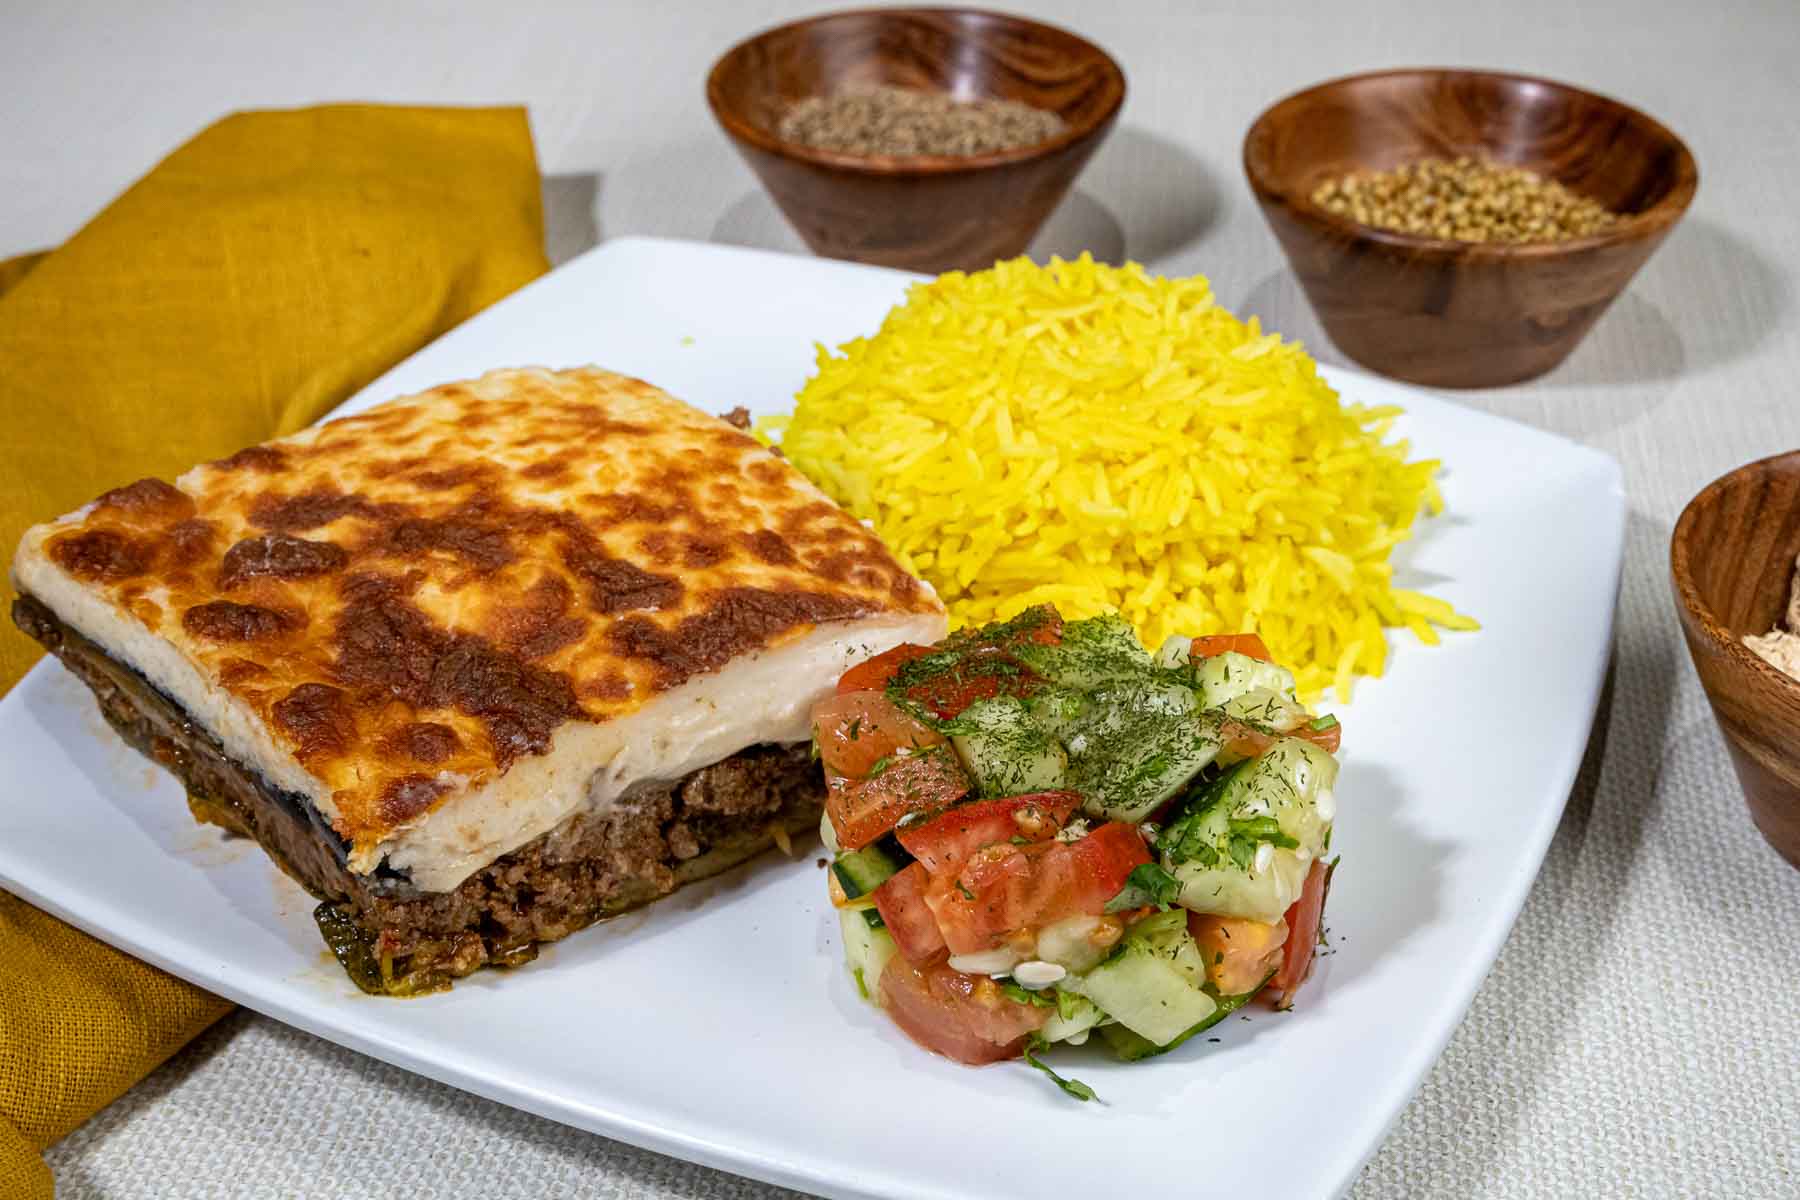 Mussaka, an egglant and potato-based dish layered with ground meat at Cous Cous Cafe